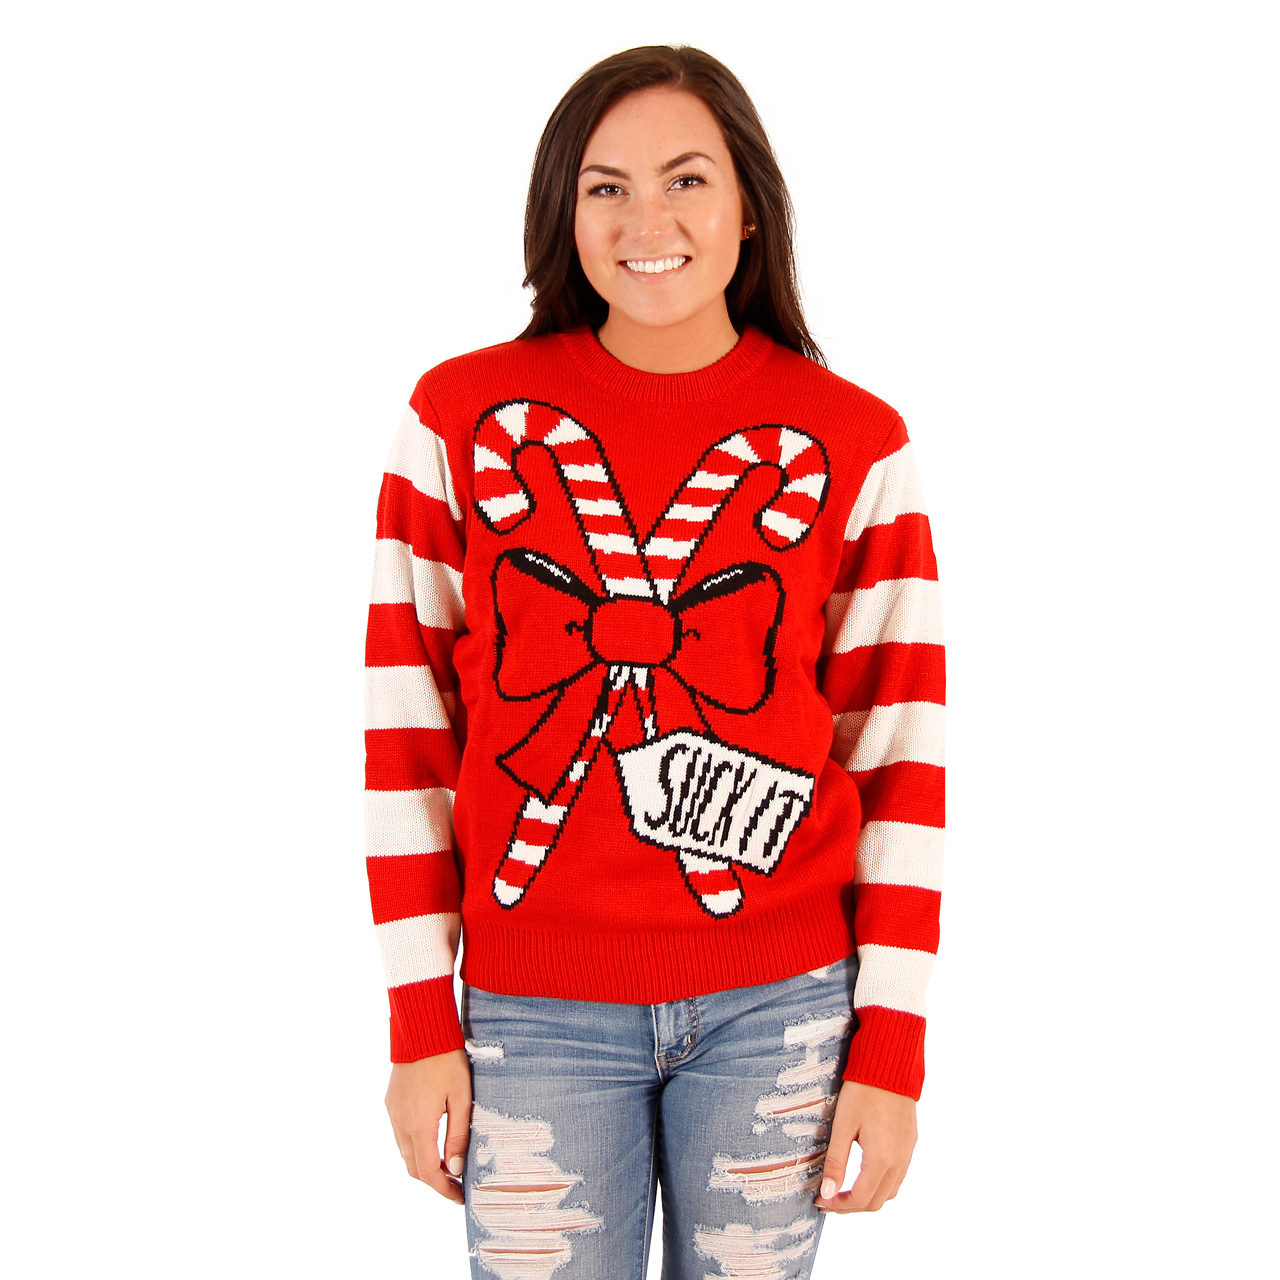 Women’s Suck It Candy Cane Funny Ugly Sweater,Ugly Christmas Sweaters | Funny Xmas Sweaters for Men and Women